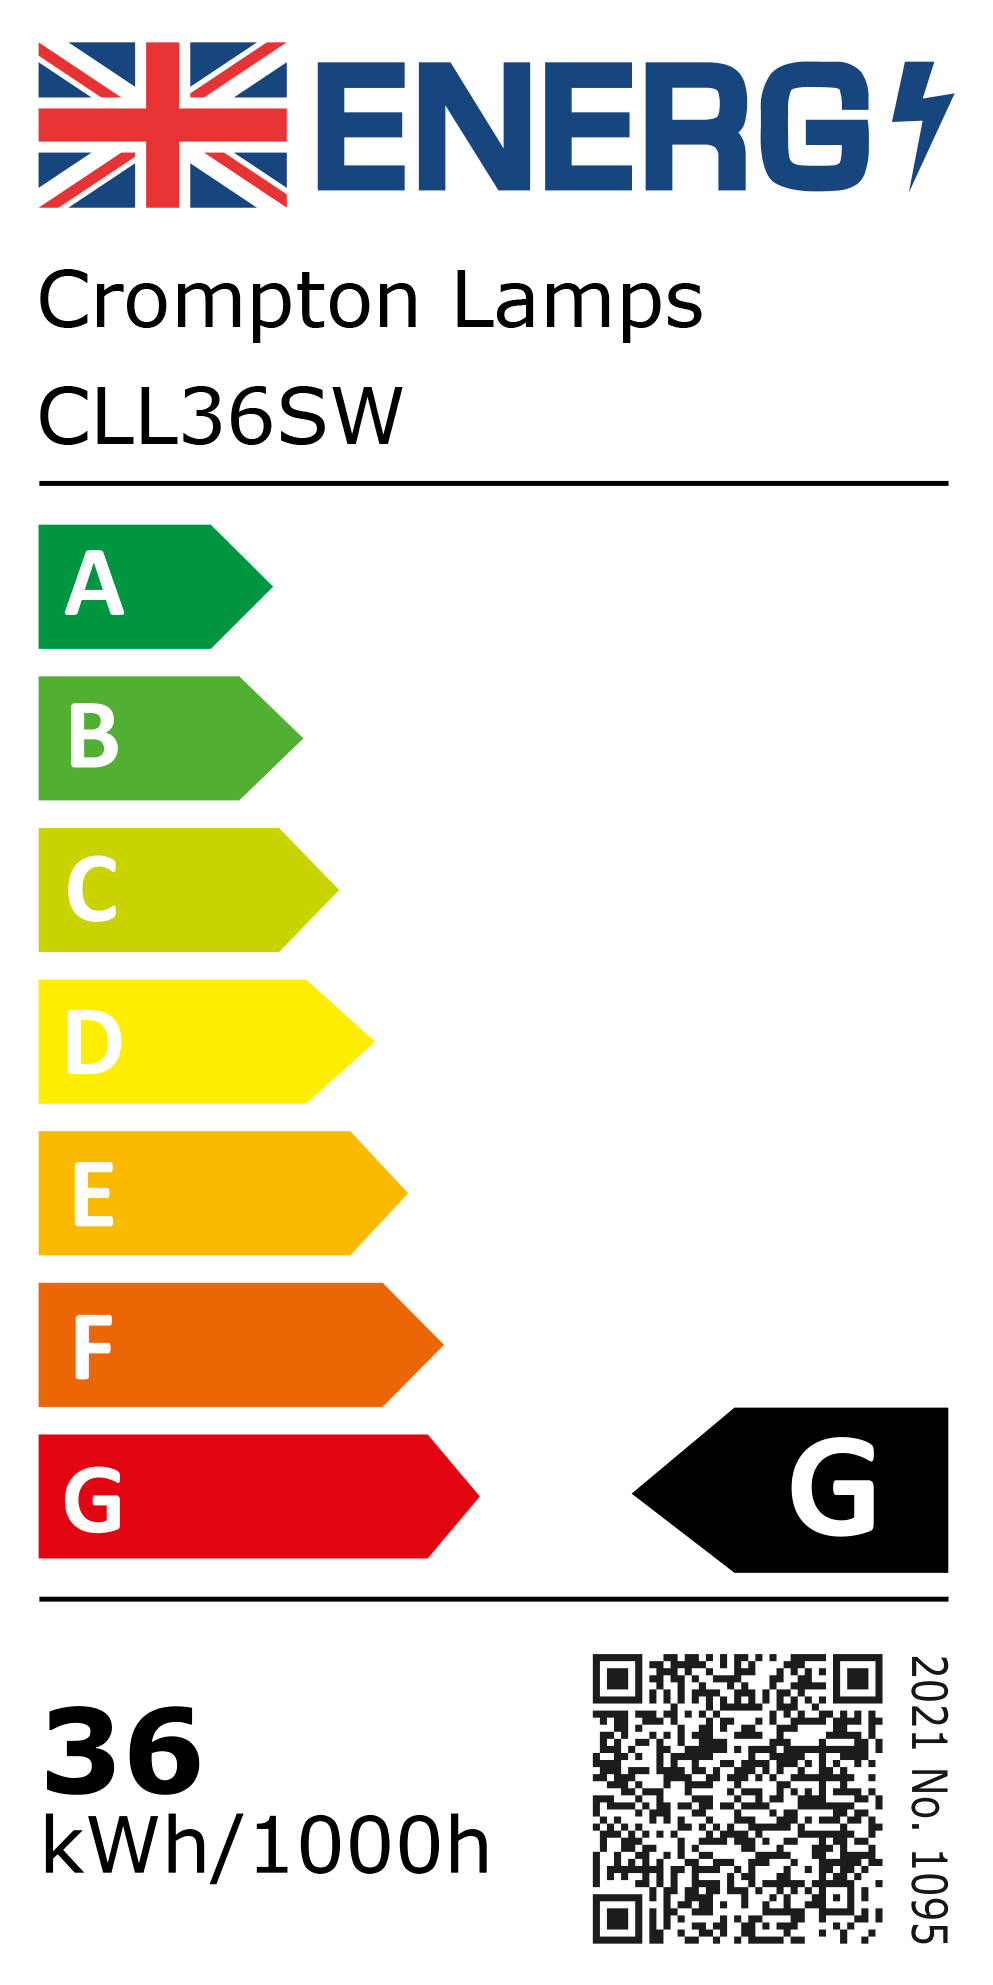 New 2021 Energy Rating Label: Stock Code CLL36SW